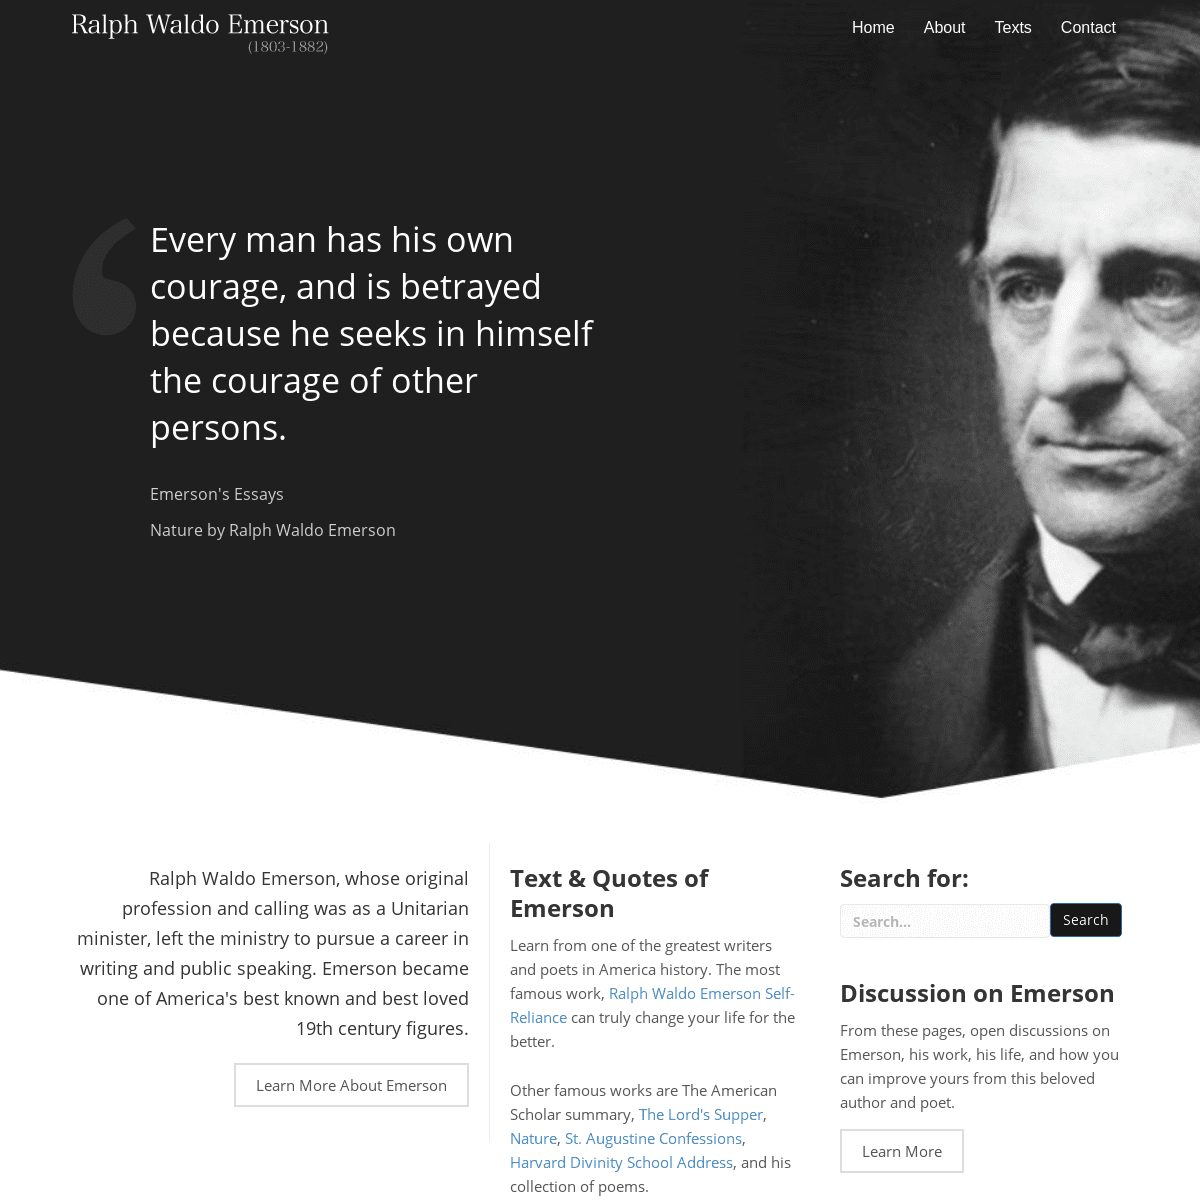 Ralph Waldo Emerson - Selected Works and Essays